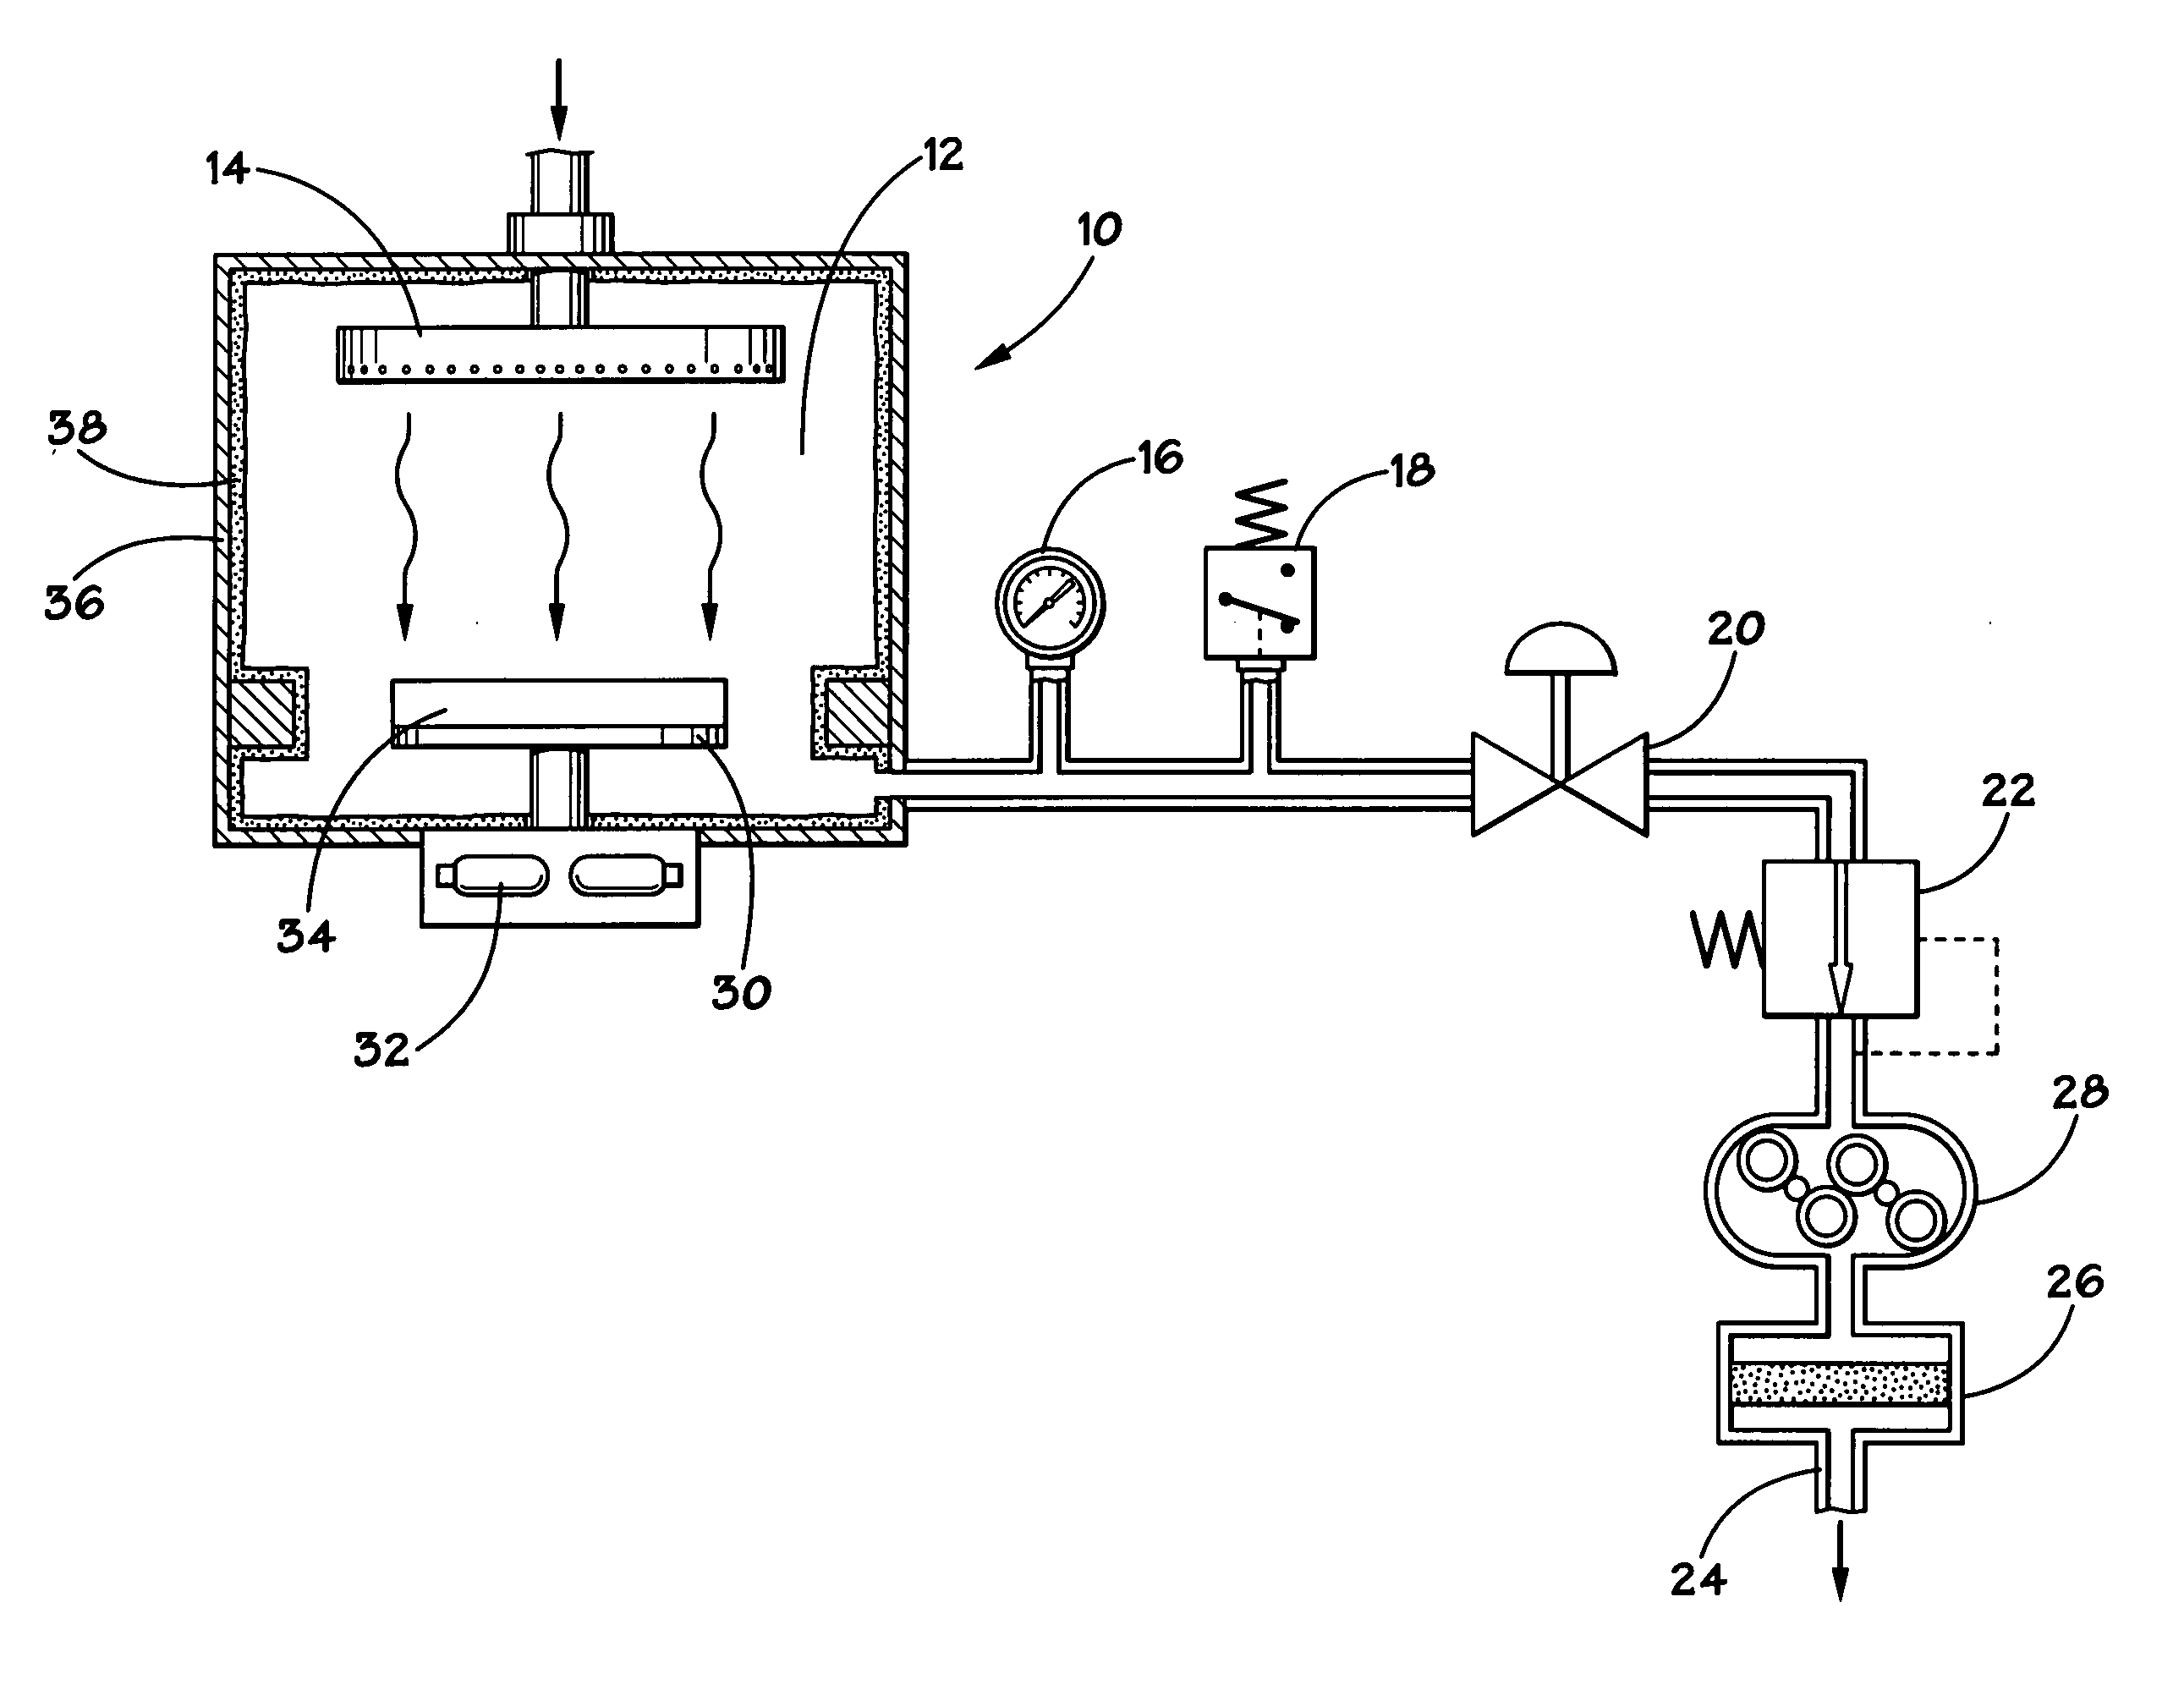 Conditioning of a reaction chamber